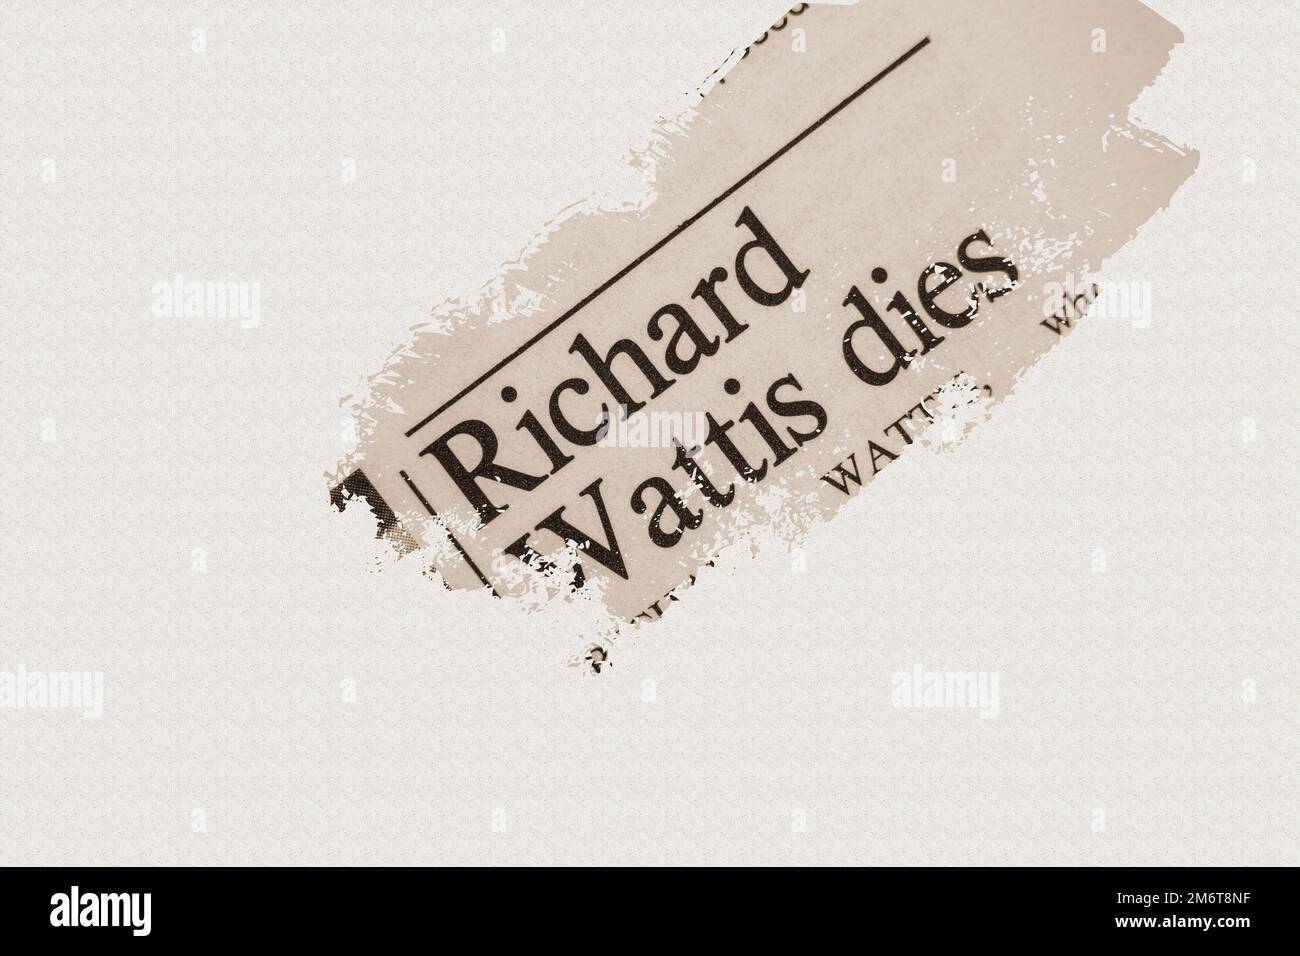 news story from 1975 newspaper headline article title - Richard Wattis dies in sepia Stock Photo